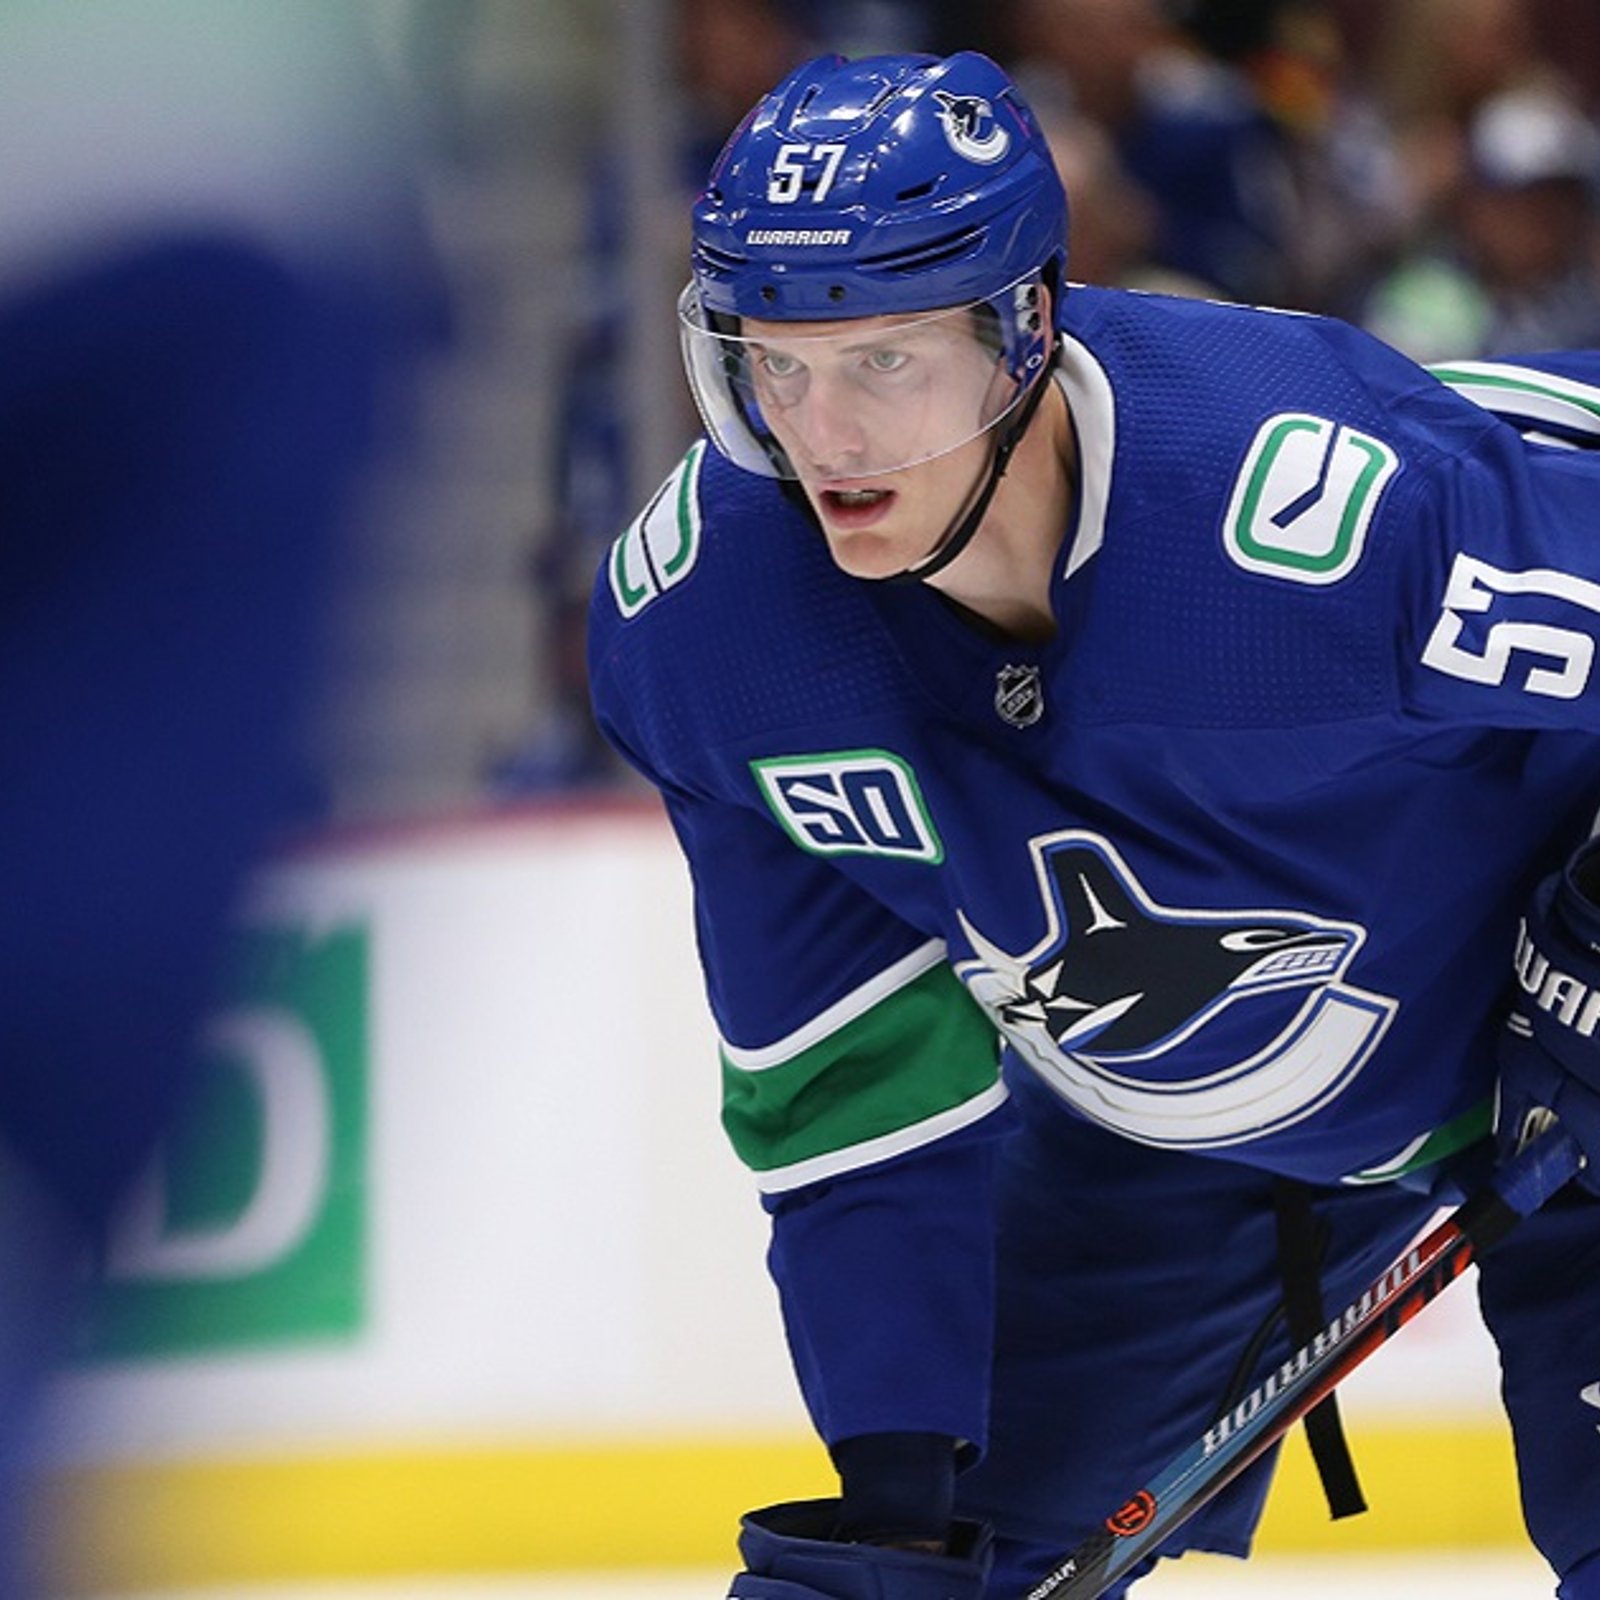 Concern for Canucks ahead of Game 6 as player leaves warmups.